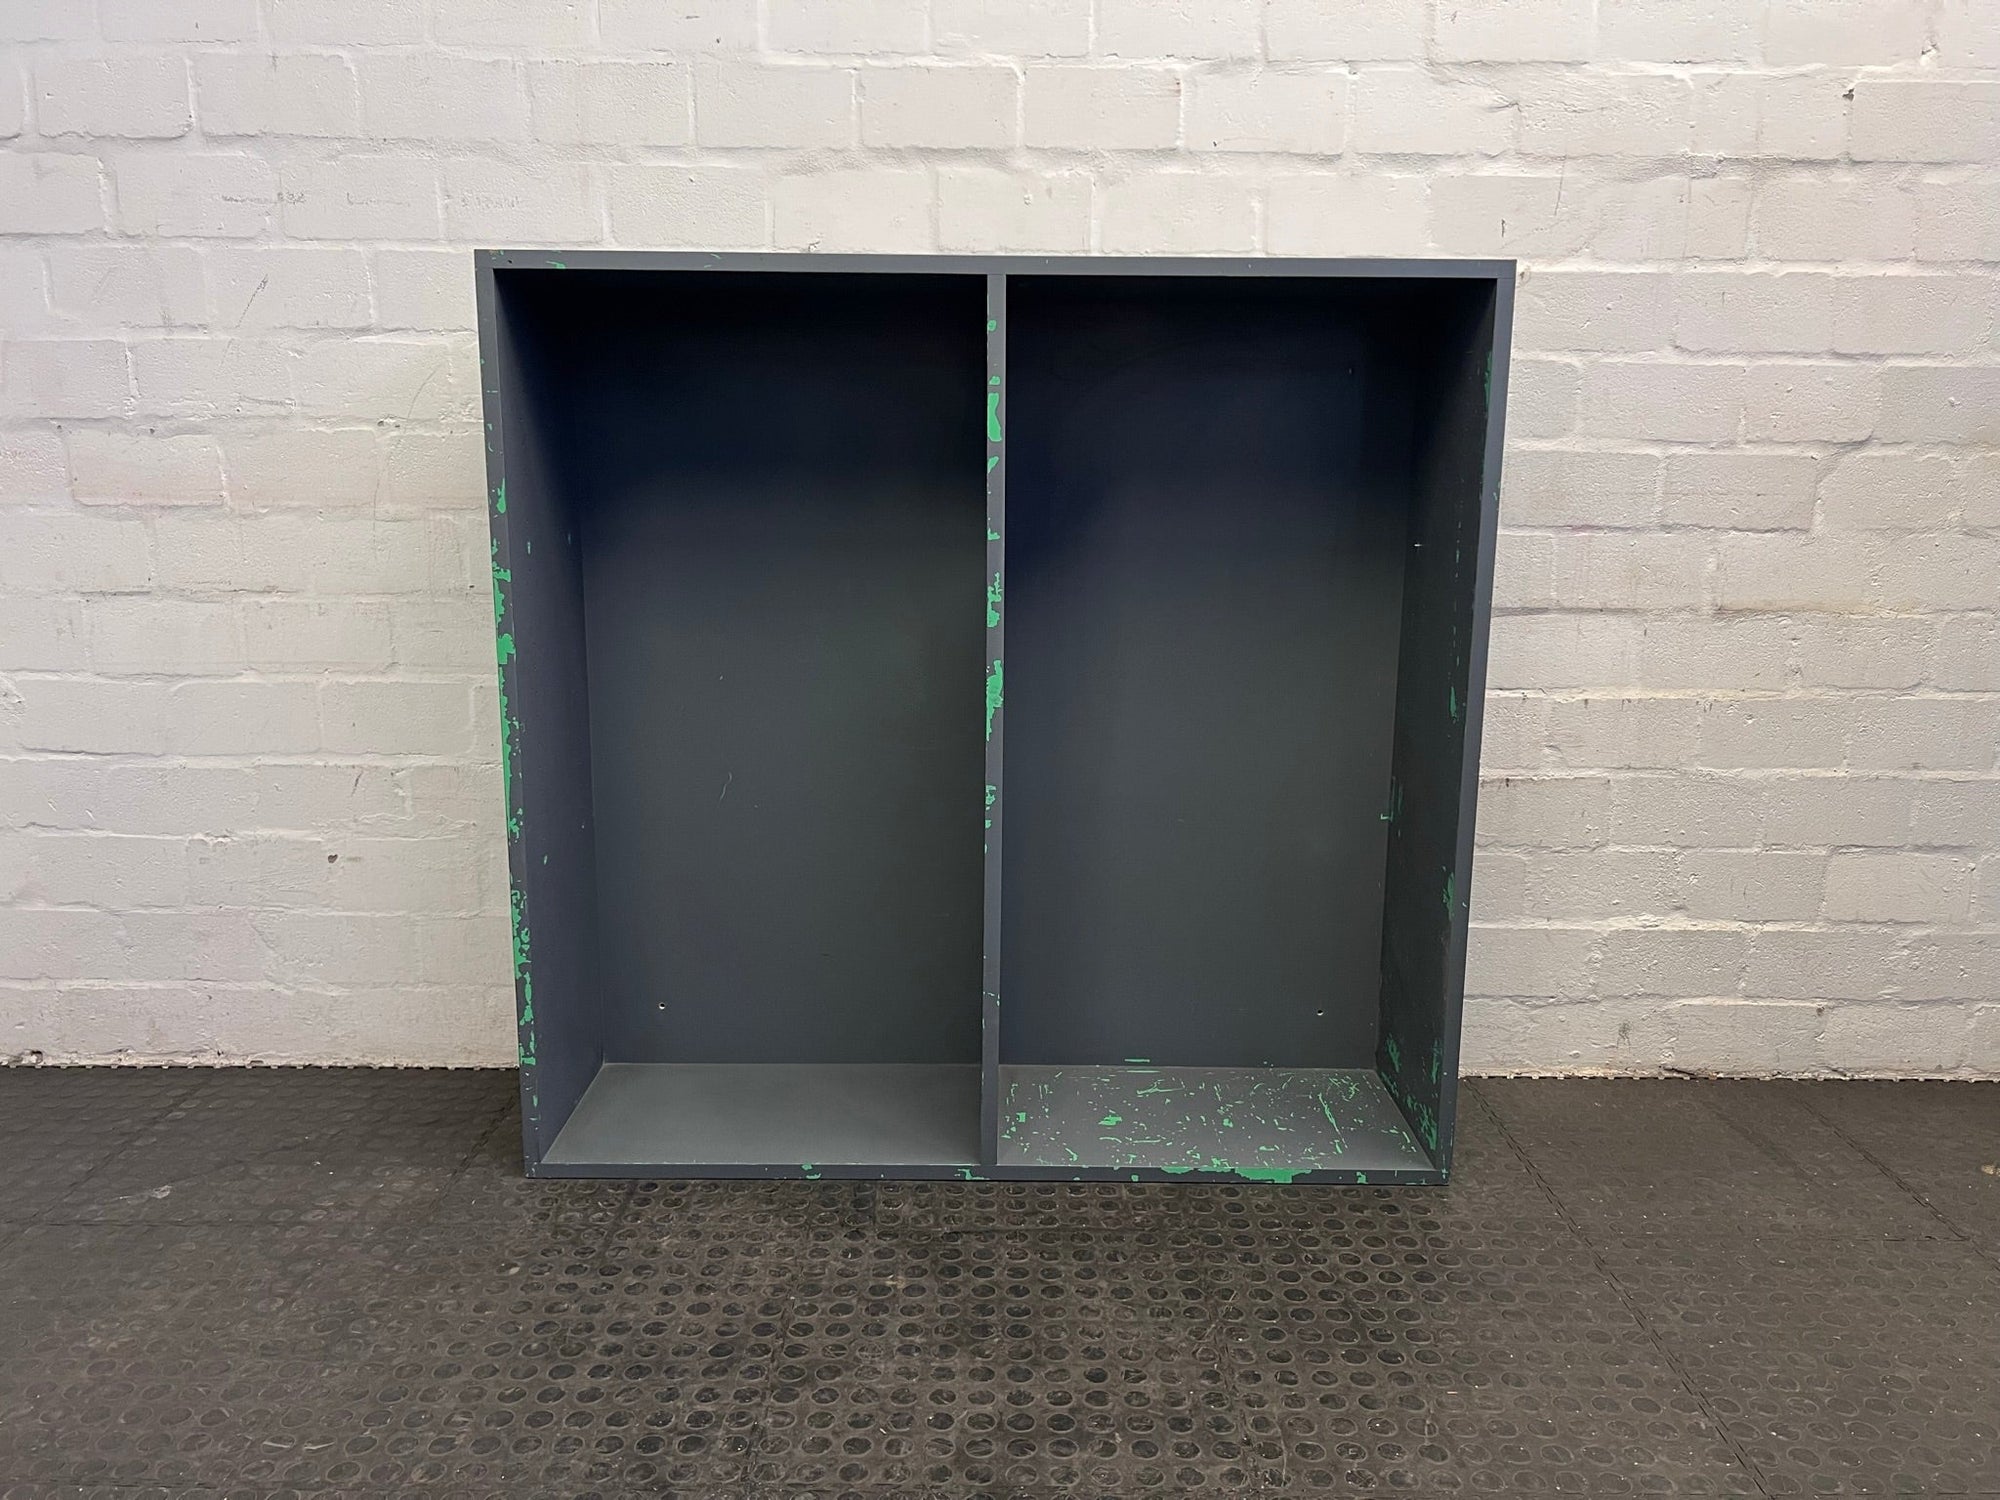 2 Division Grey Shelf (Paint Chipping/Some Slight Damage) - REDUCED